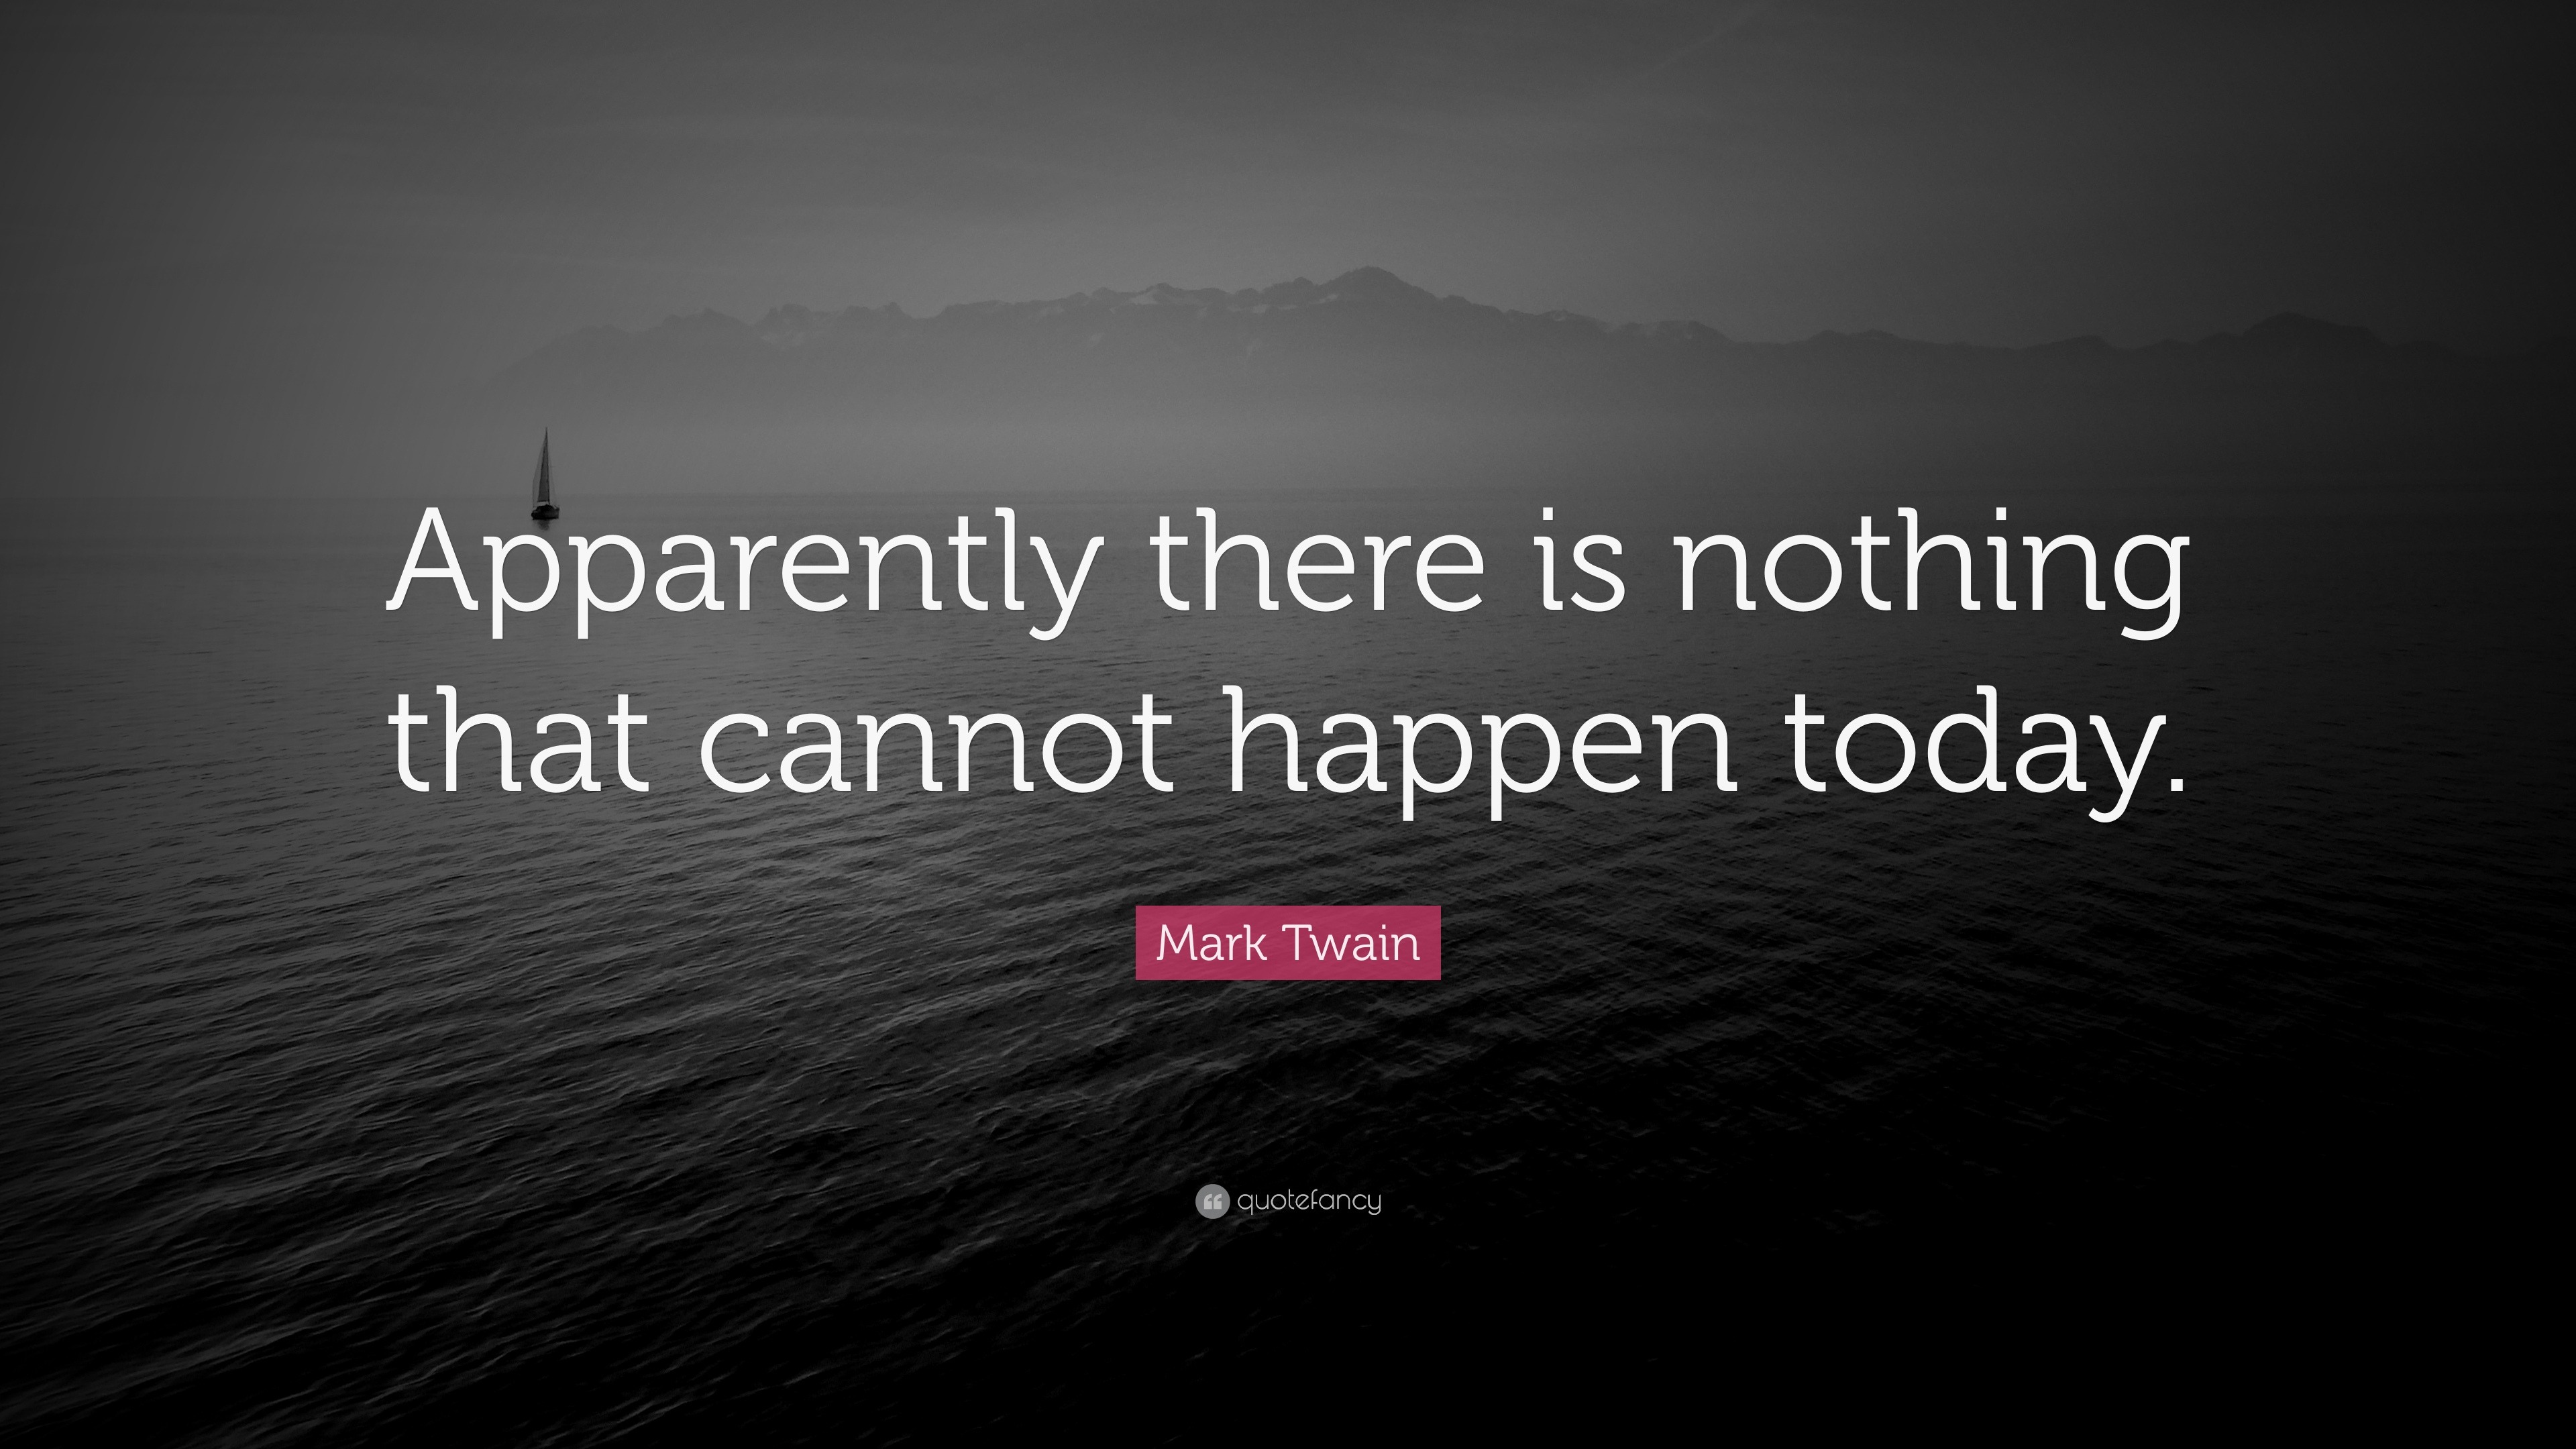 Mark Twain Quote: “Apparently there is nothing that cannot happen today.”